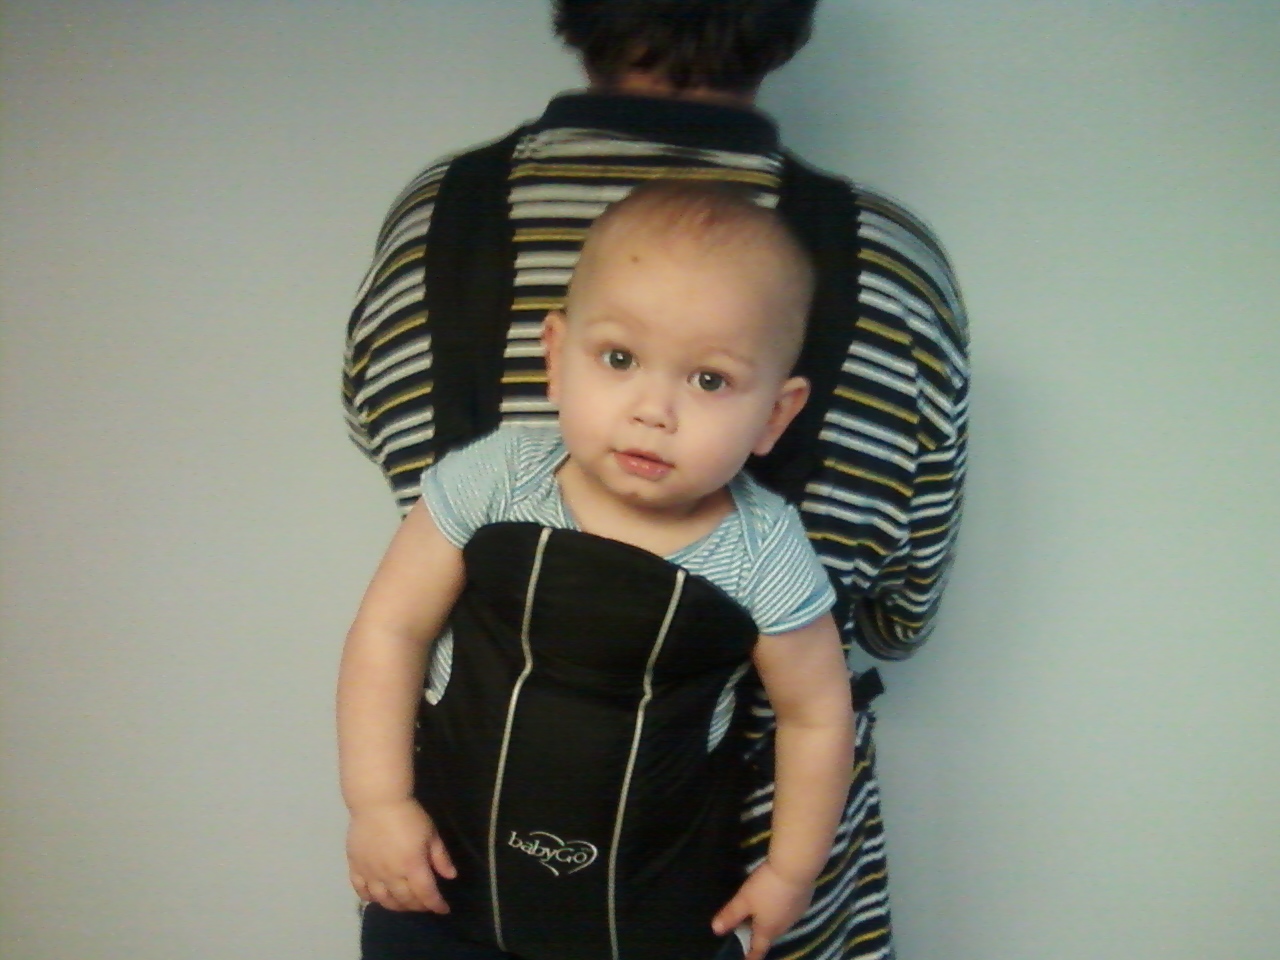 14 month old fits in baby carrier, wordless wednesday picture of 14 month old in baby carrier